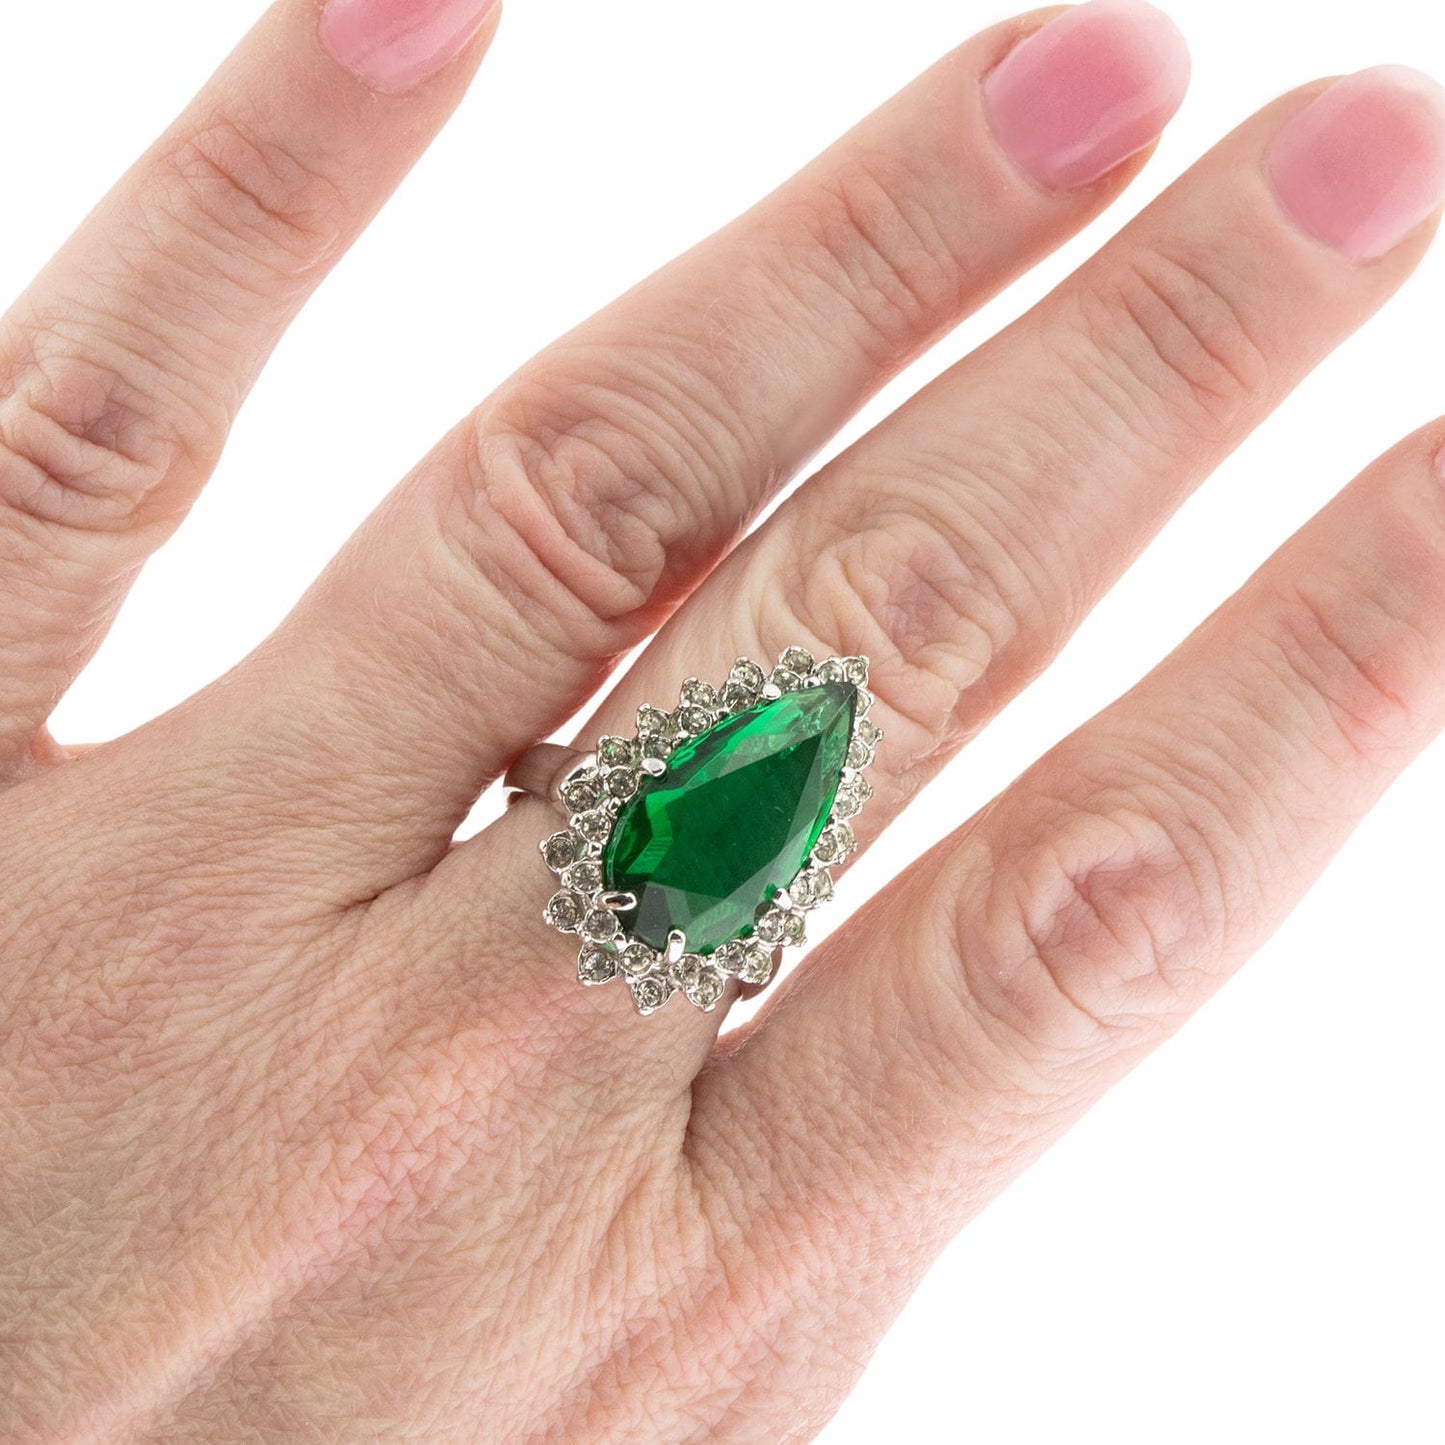 Victorian Style Ring Emerald and Clear Swarovski Crystals 18k White Gold Cocktail Ring Antique Womans #R212 - Limited Stock - Never Worn